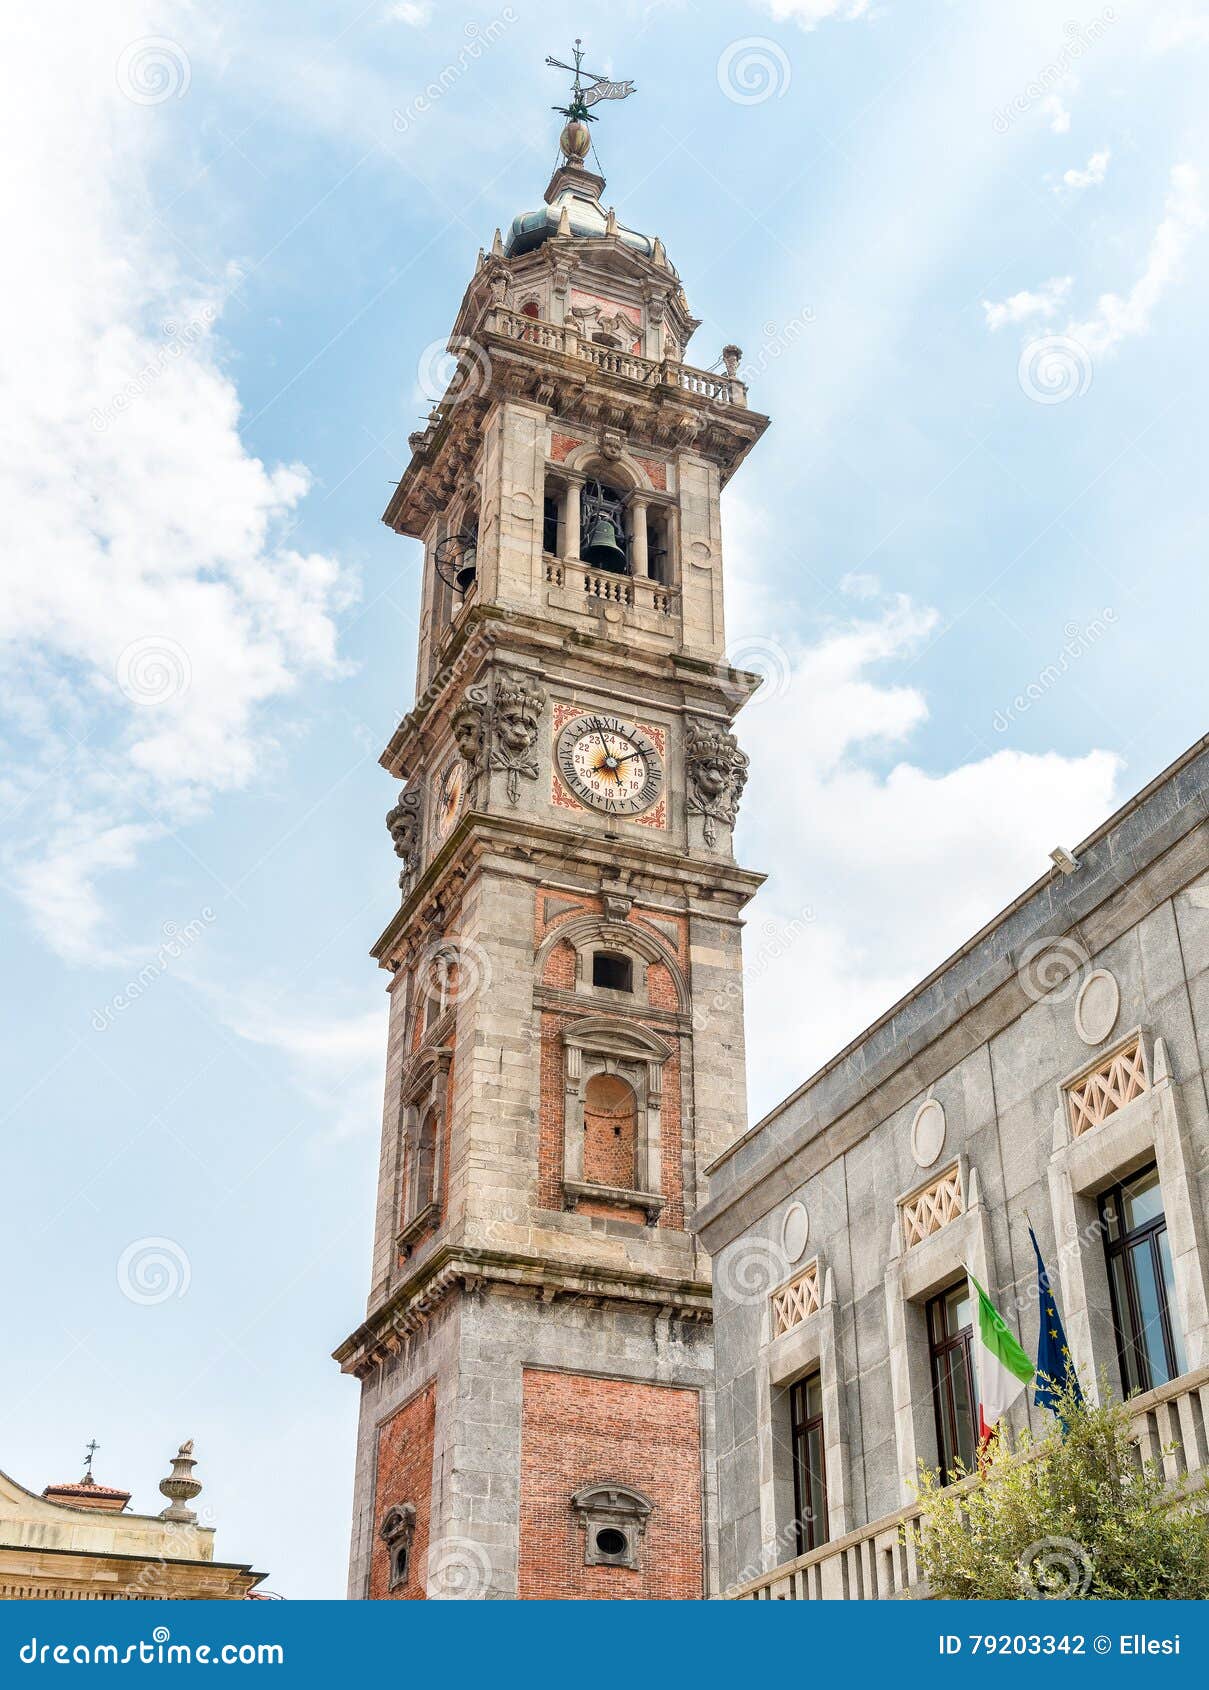 bell tower of san vittore basilica of varese, italy